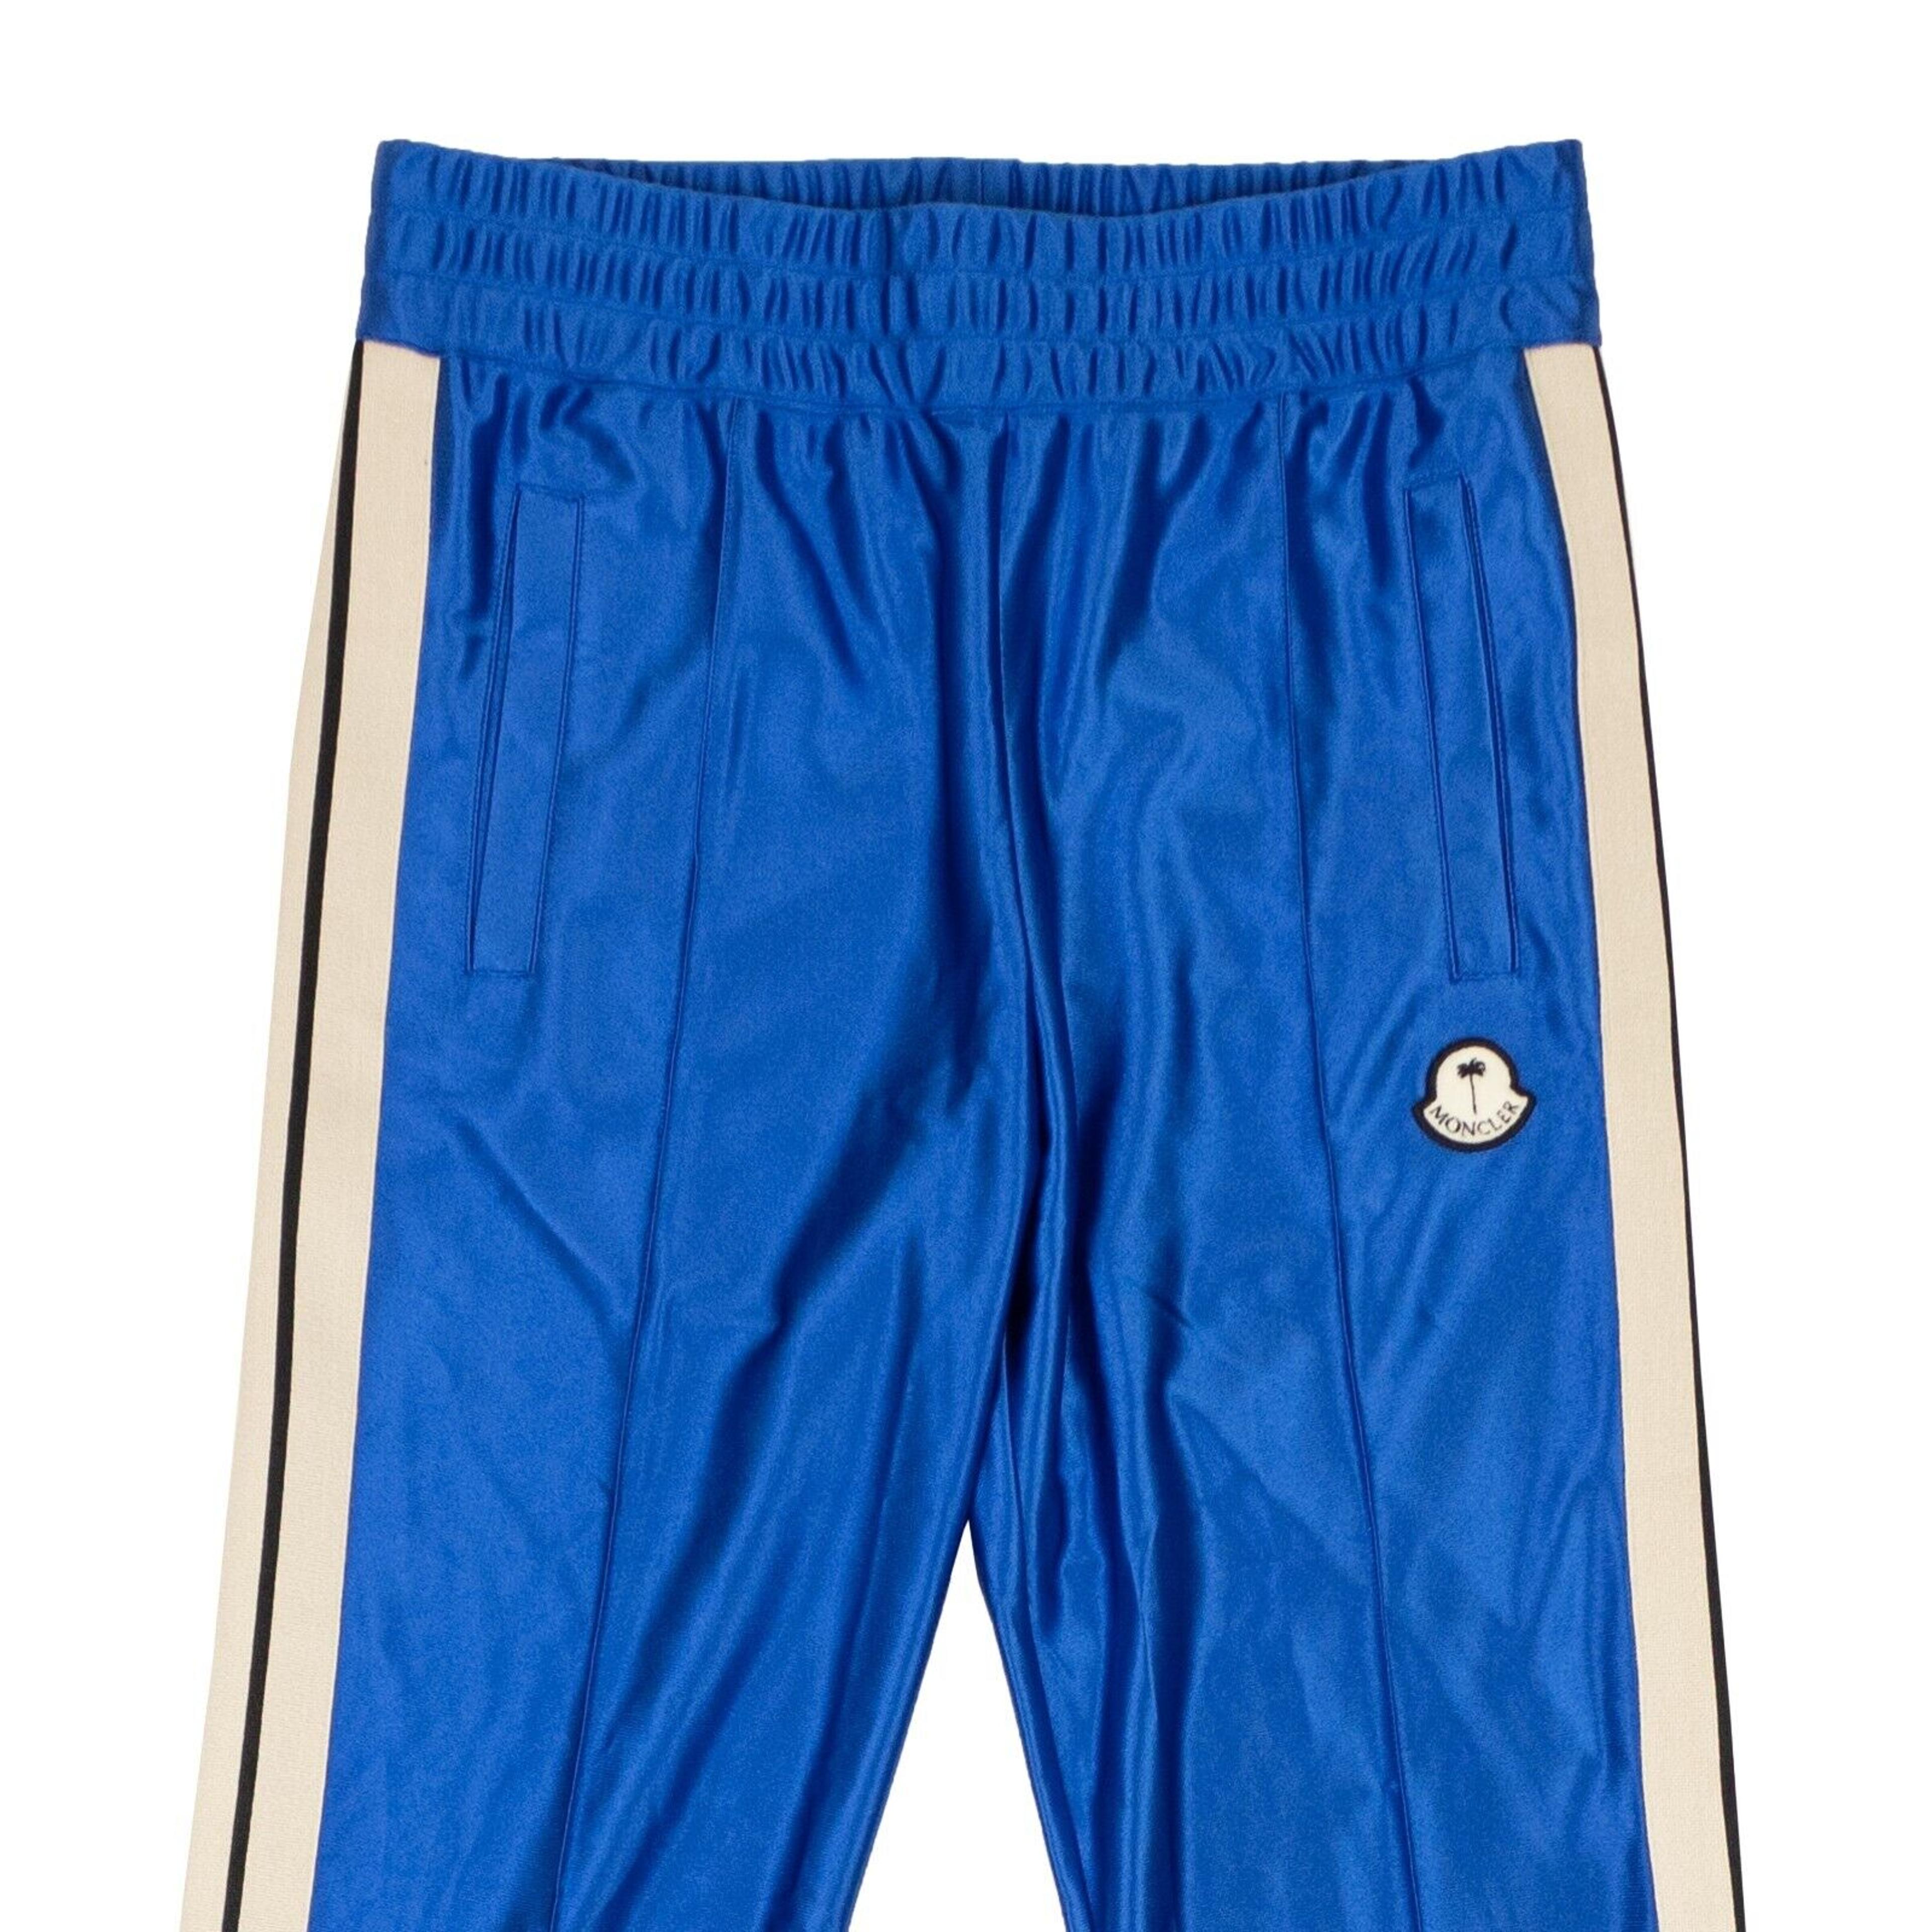 Alternate View 1 of Blue Polyester Track Pants